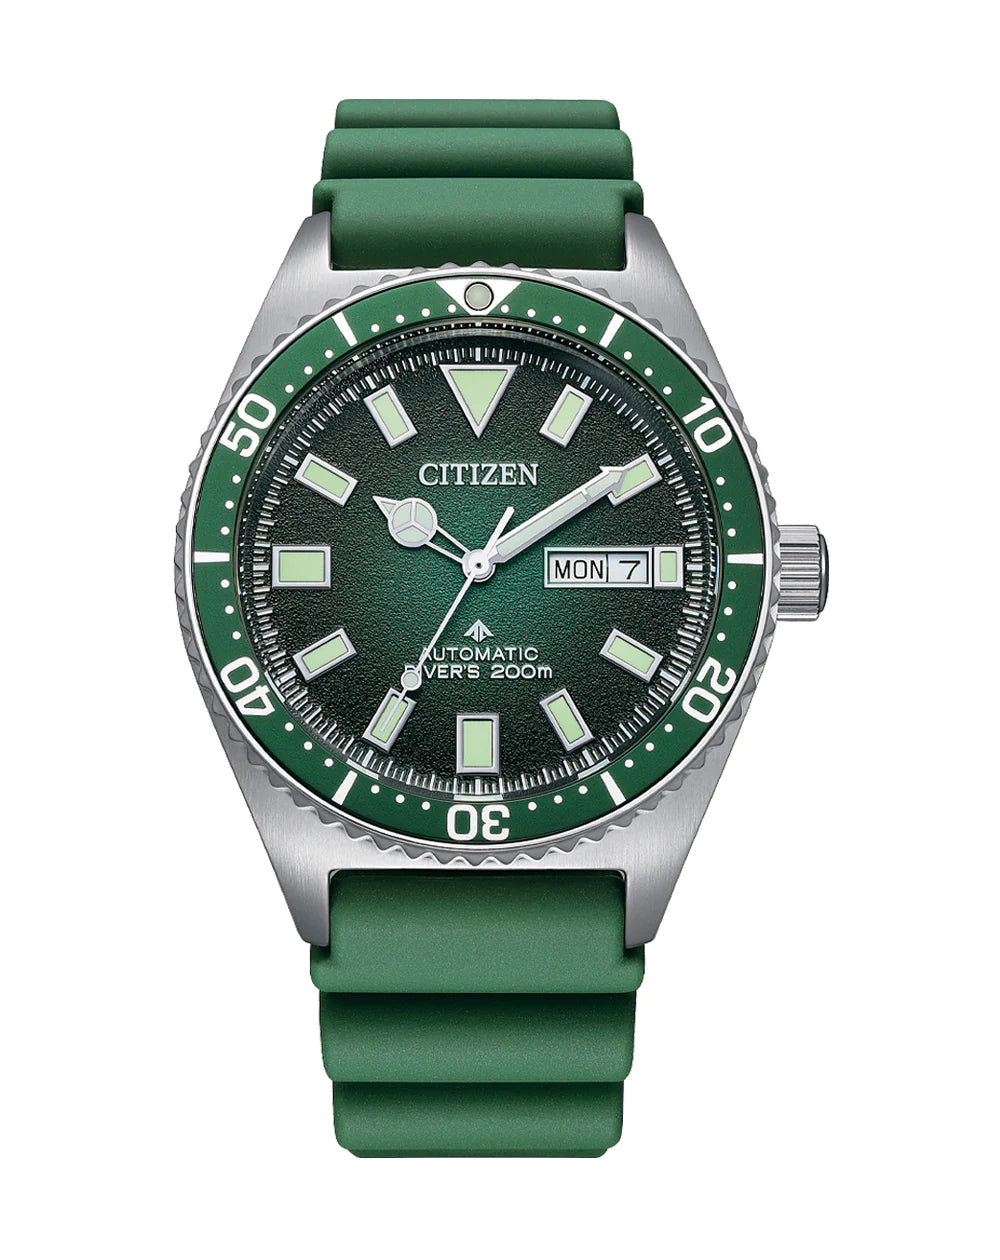 Gents Citizen Promaster Automatic WR 200M Green Dial